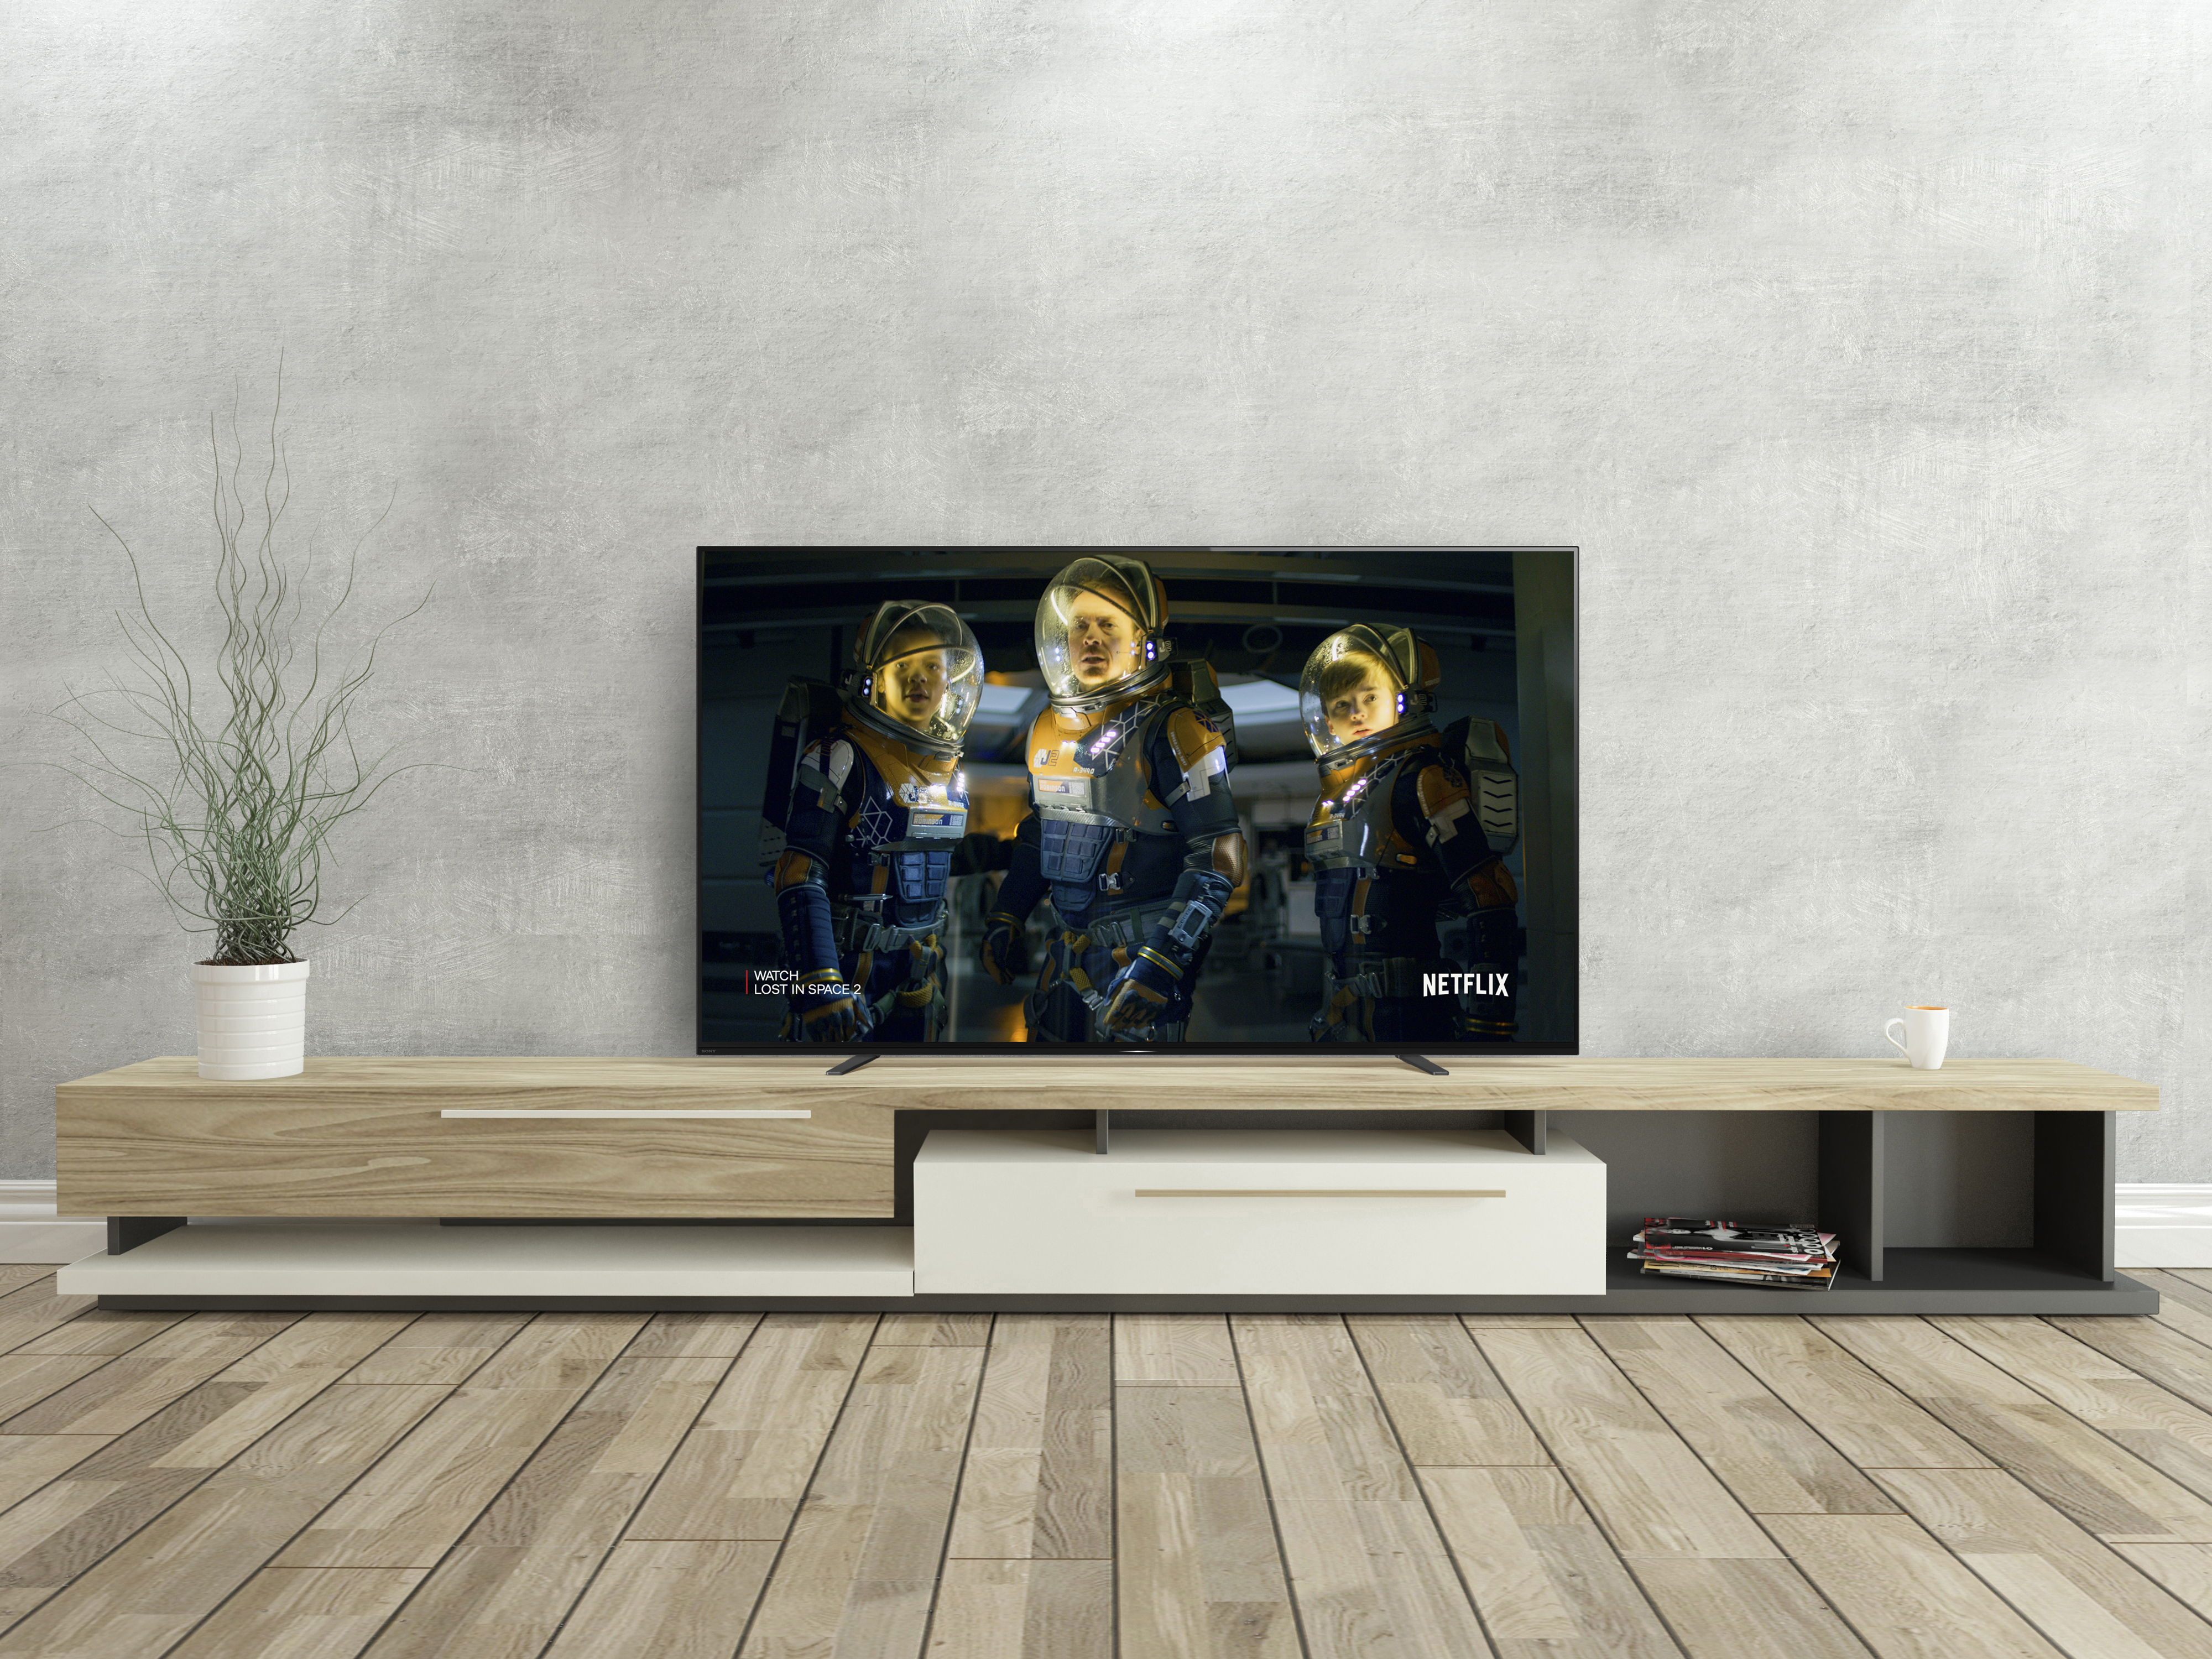 Sony 55" Class 4K UHD OLED Android Smart TV HDR Bravia A8H Series XBR55A8H - image 21 of 22